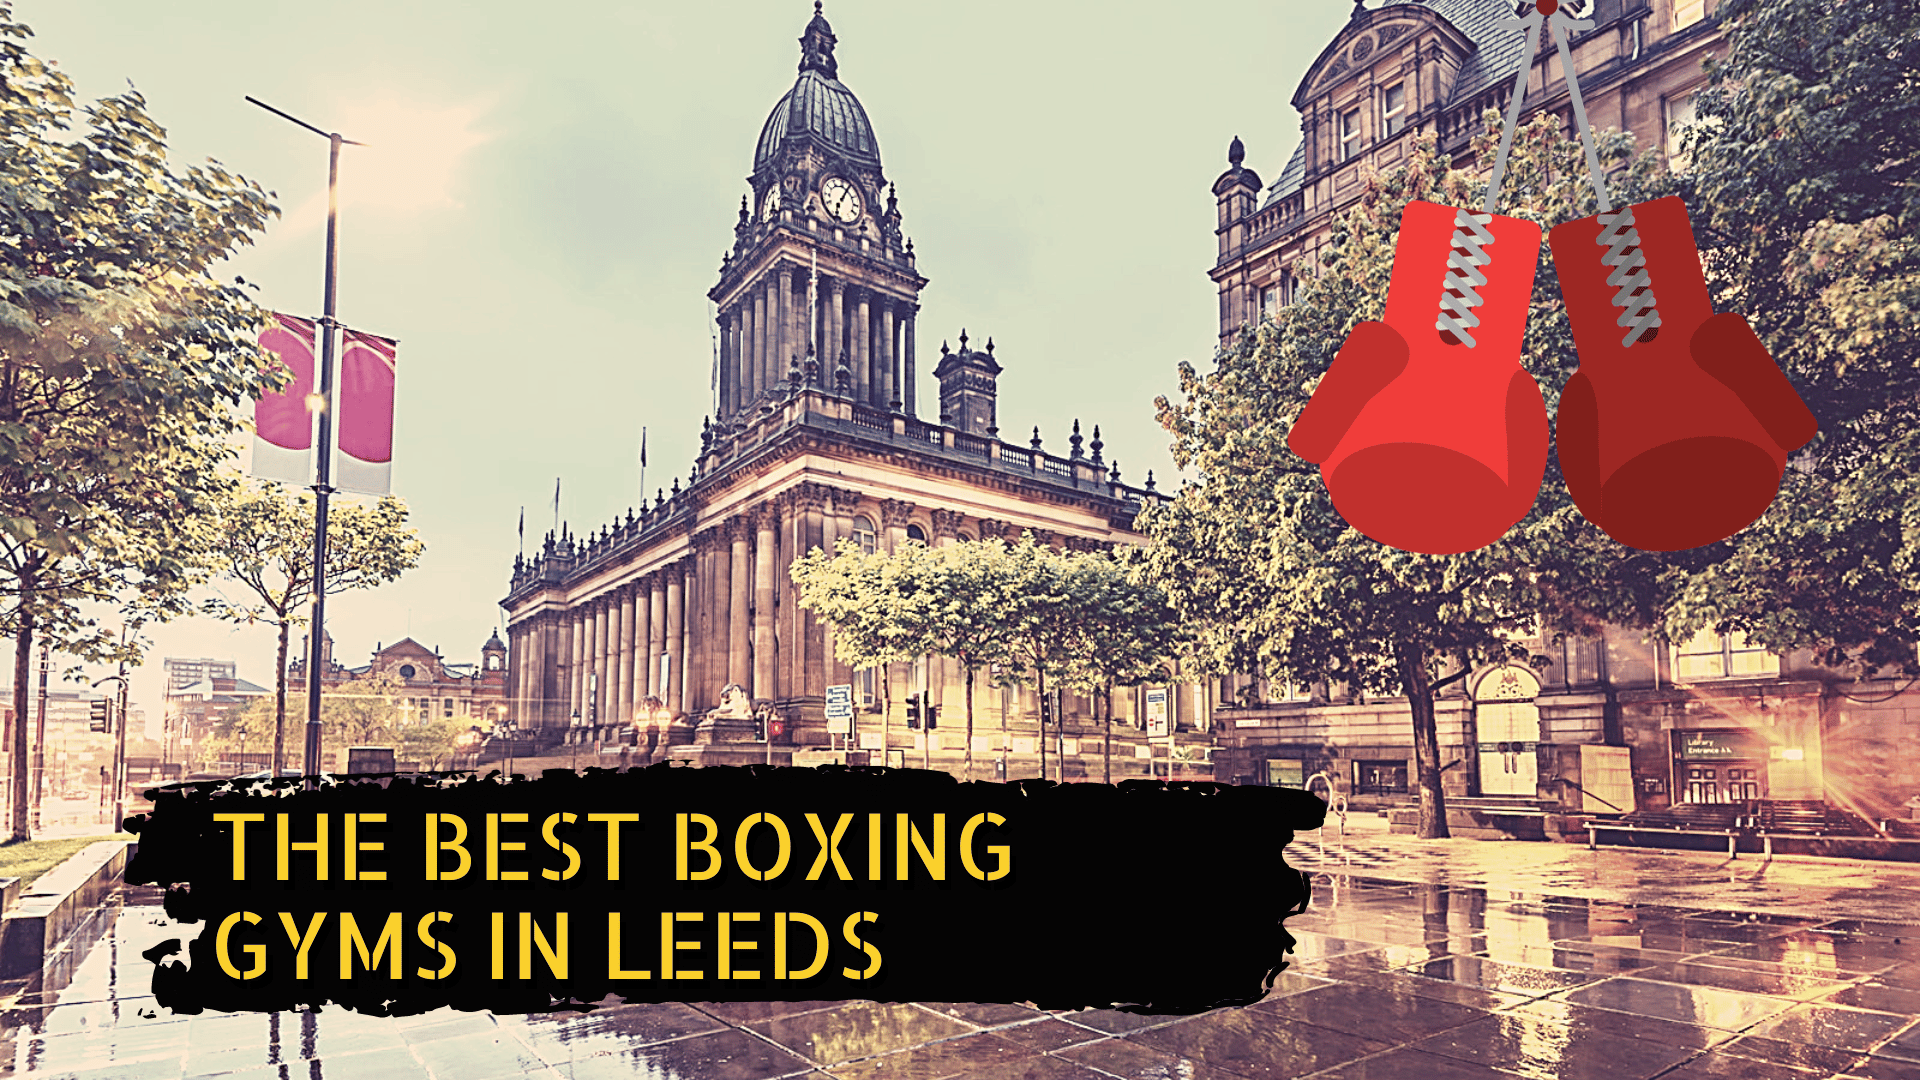 A leeds landmark, some boxing gloves, and a the title the best boxing gyms in Leeds